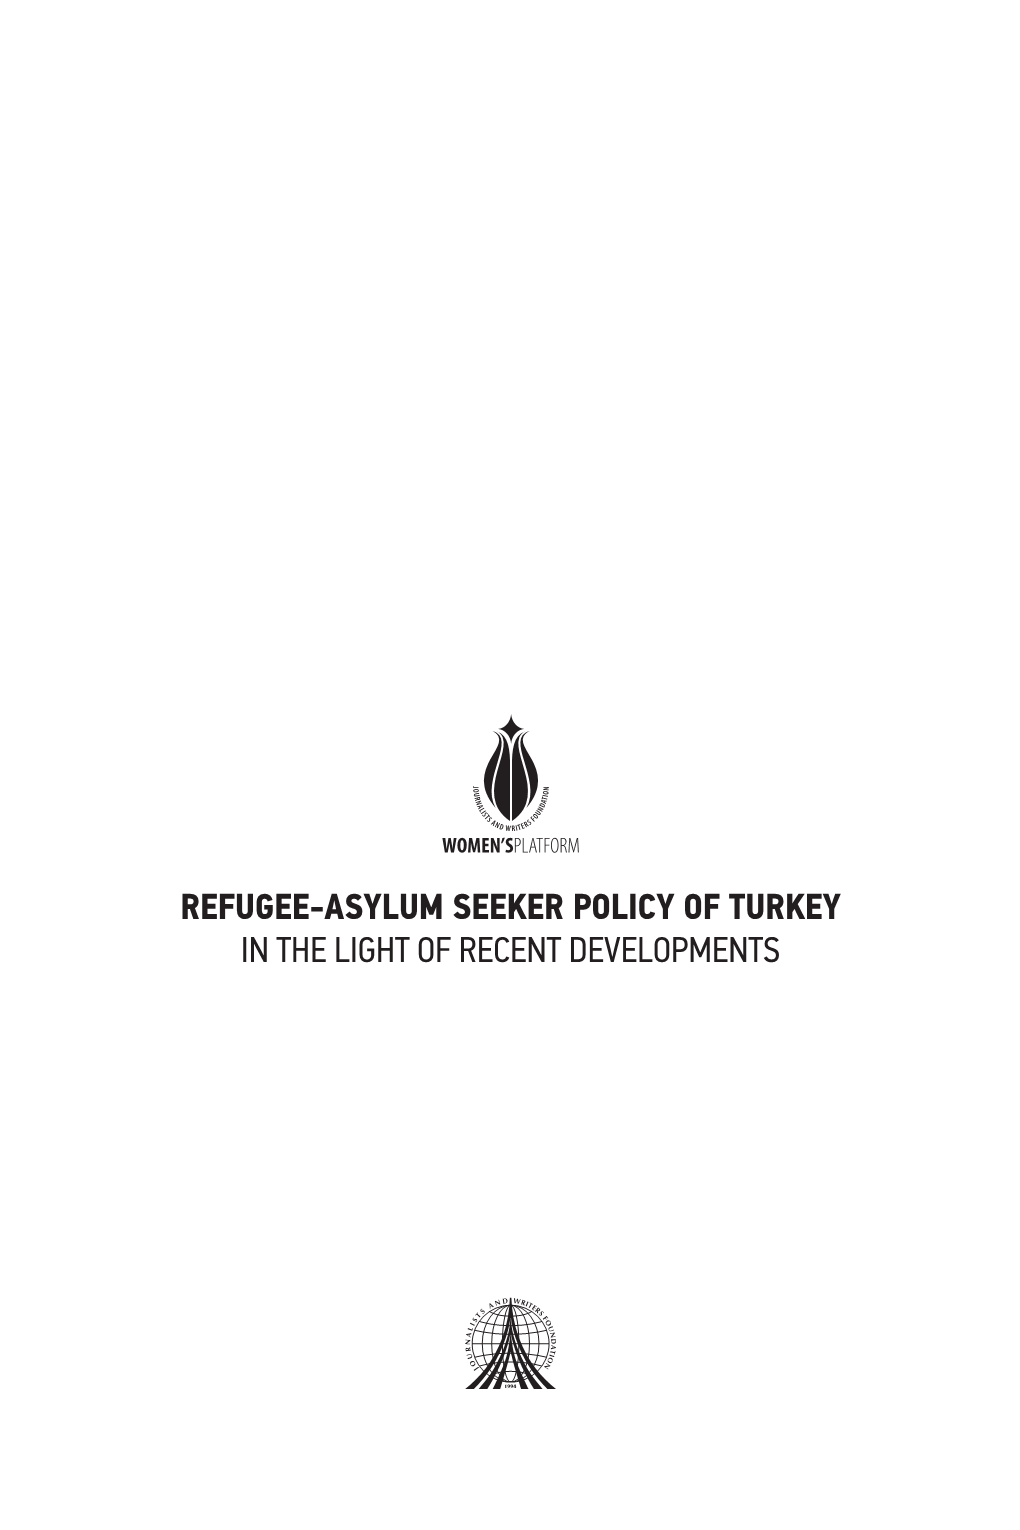 Refugee-Asylum Seeker Policy of Turkey in the Light